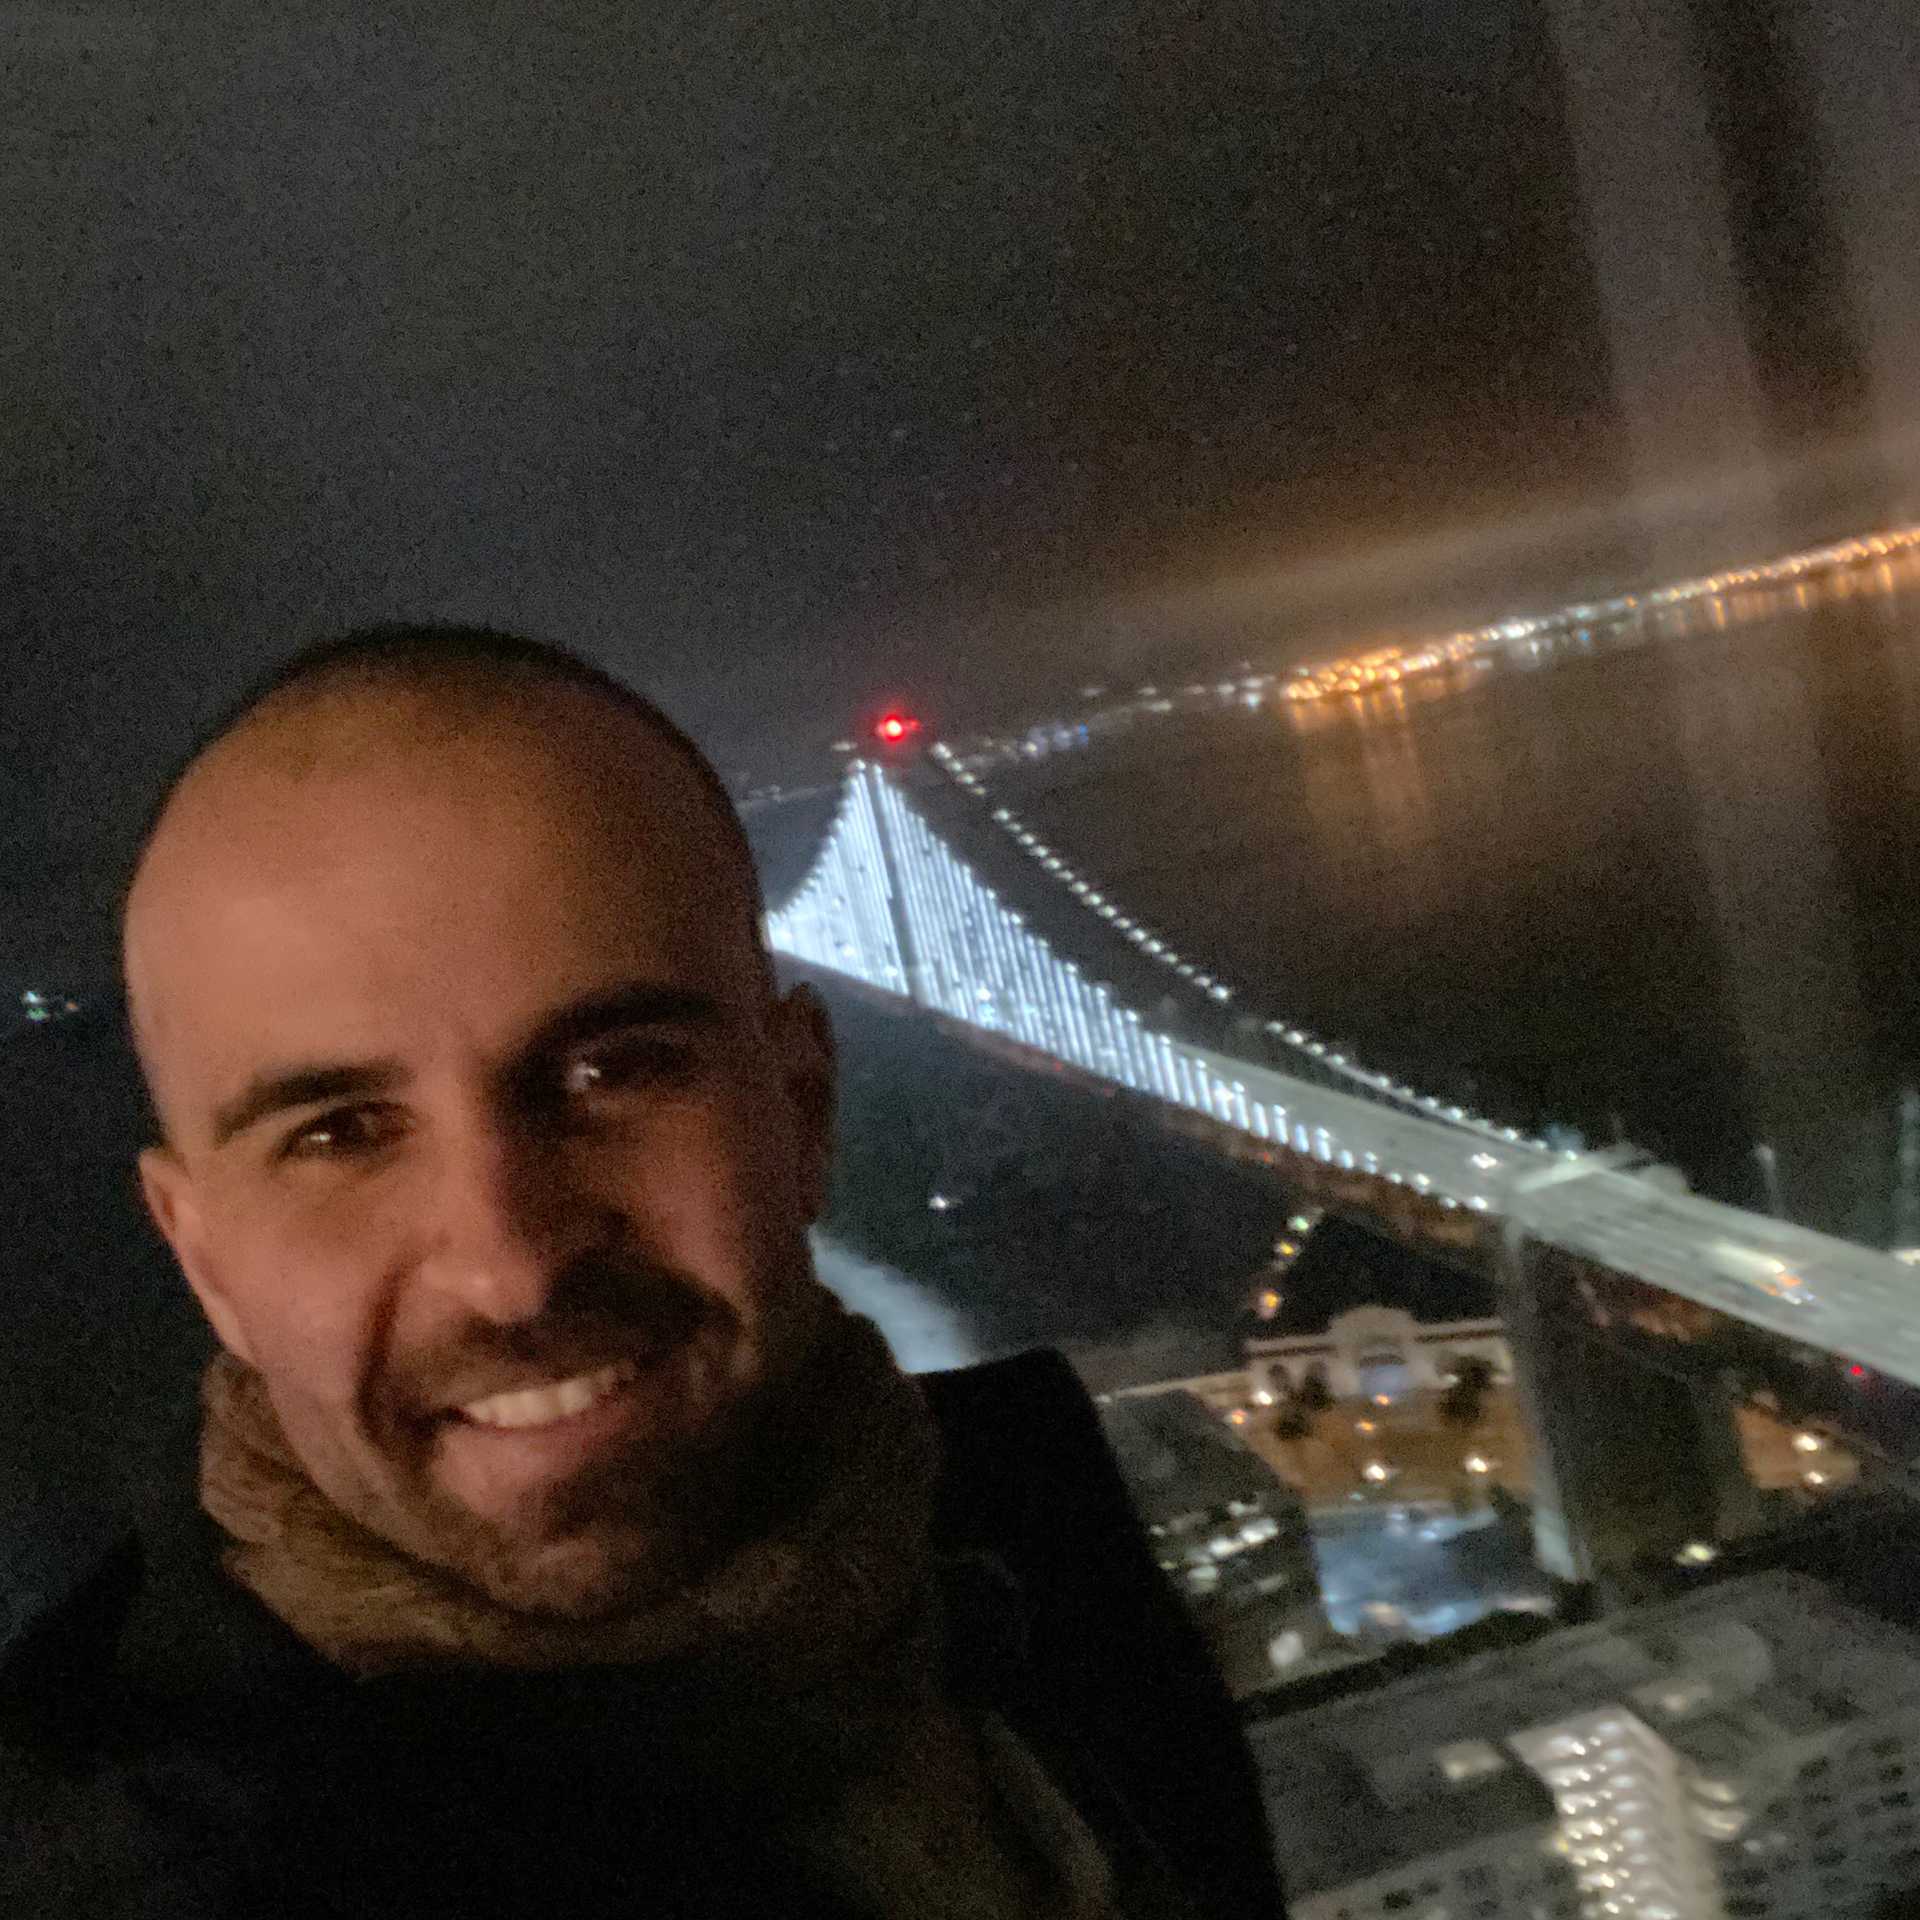 A smiling man appears with a bridge in the background, night time setting.